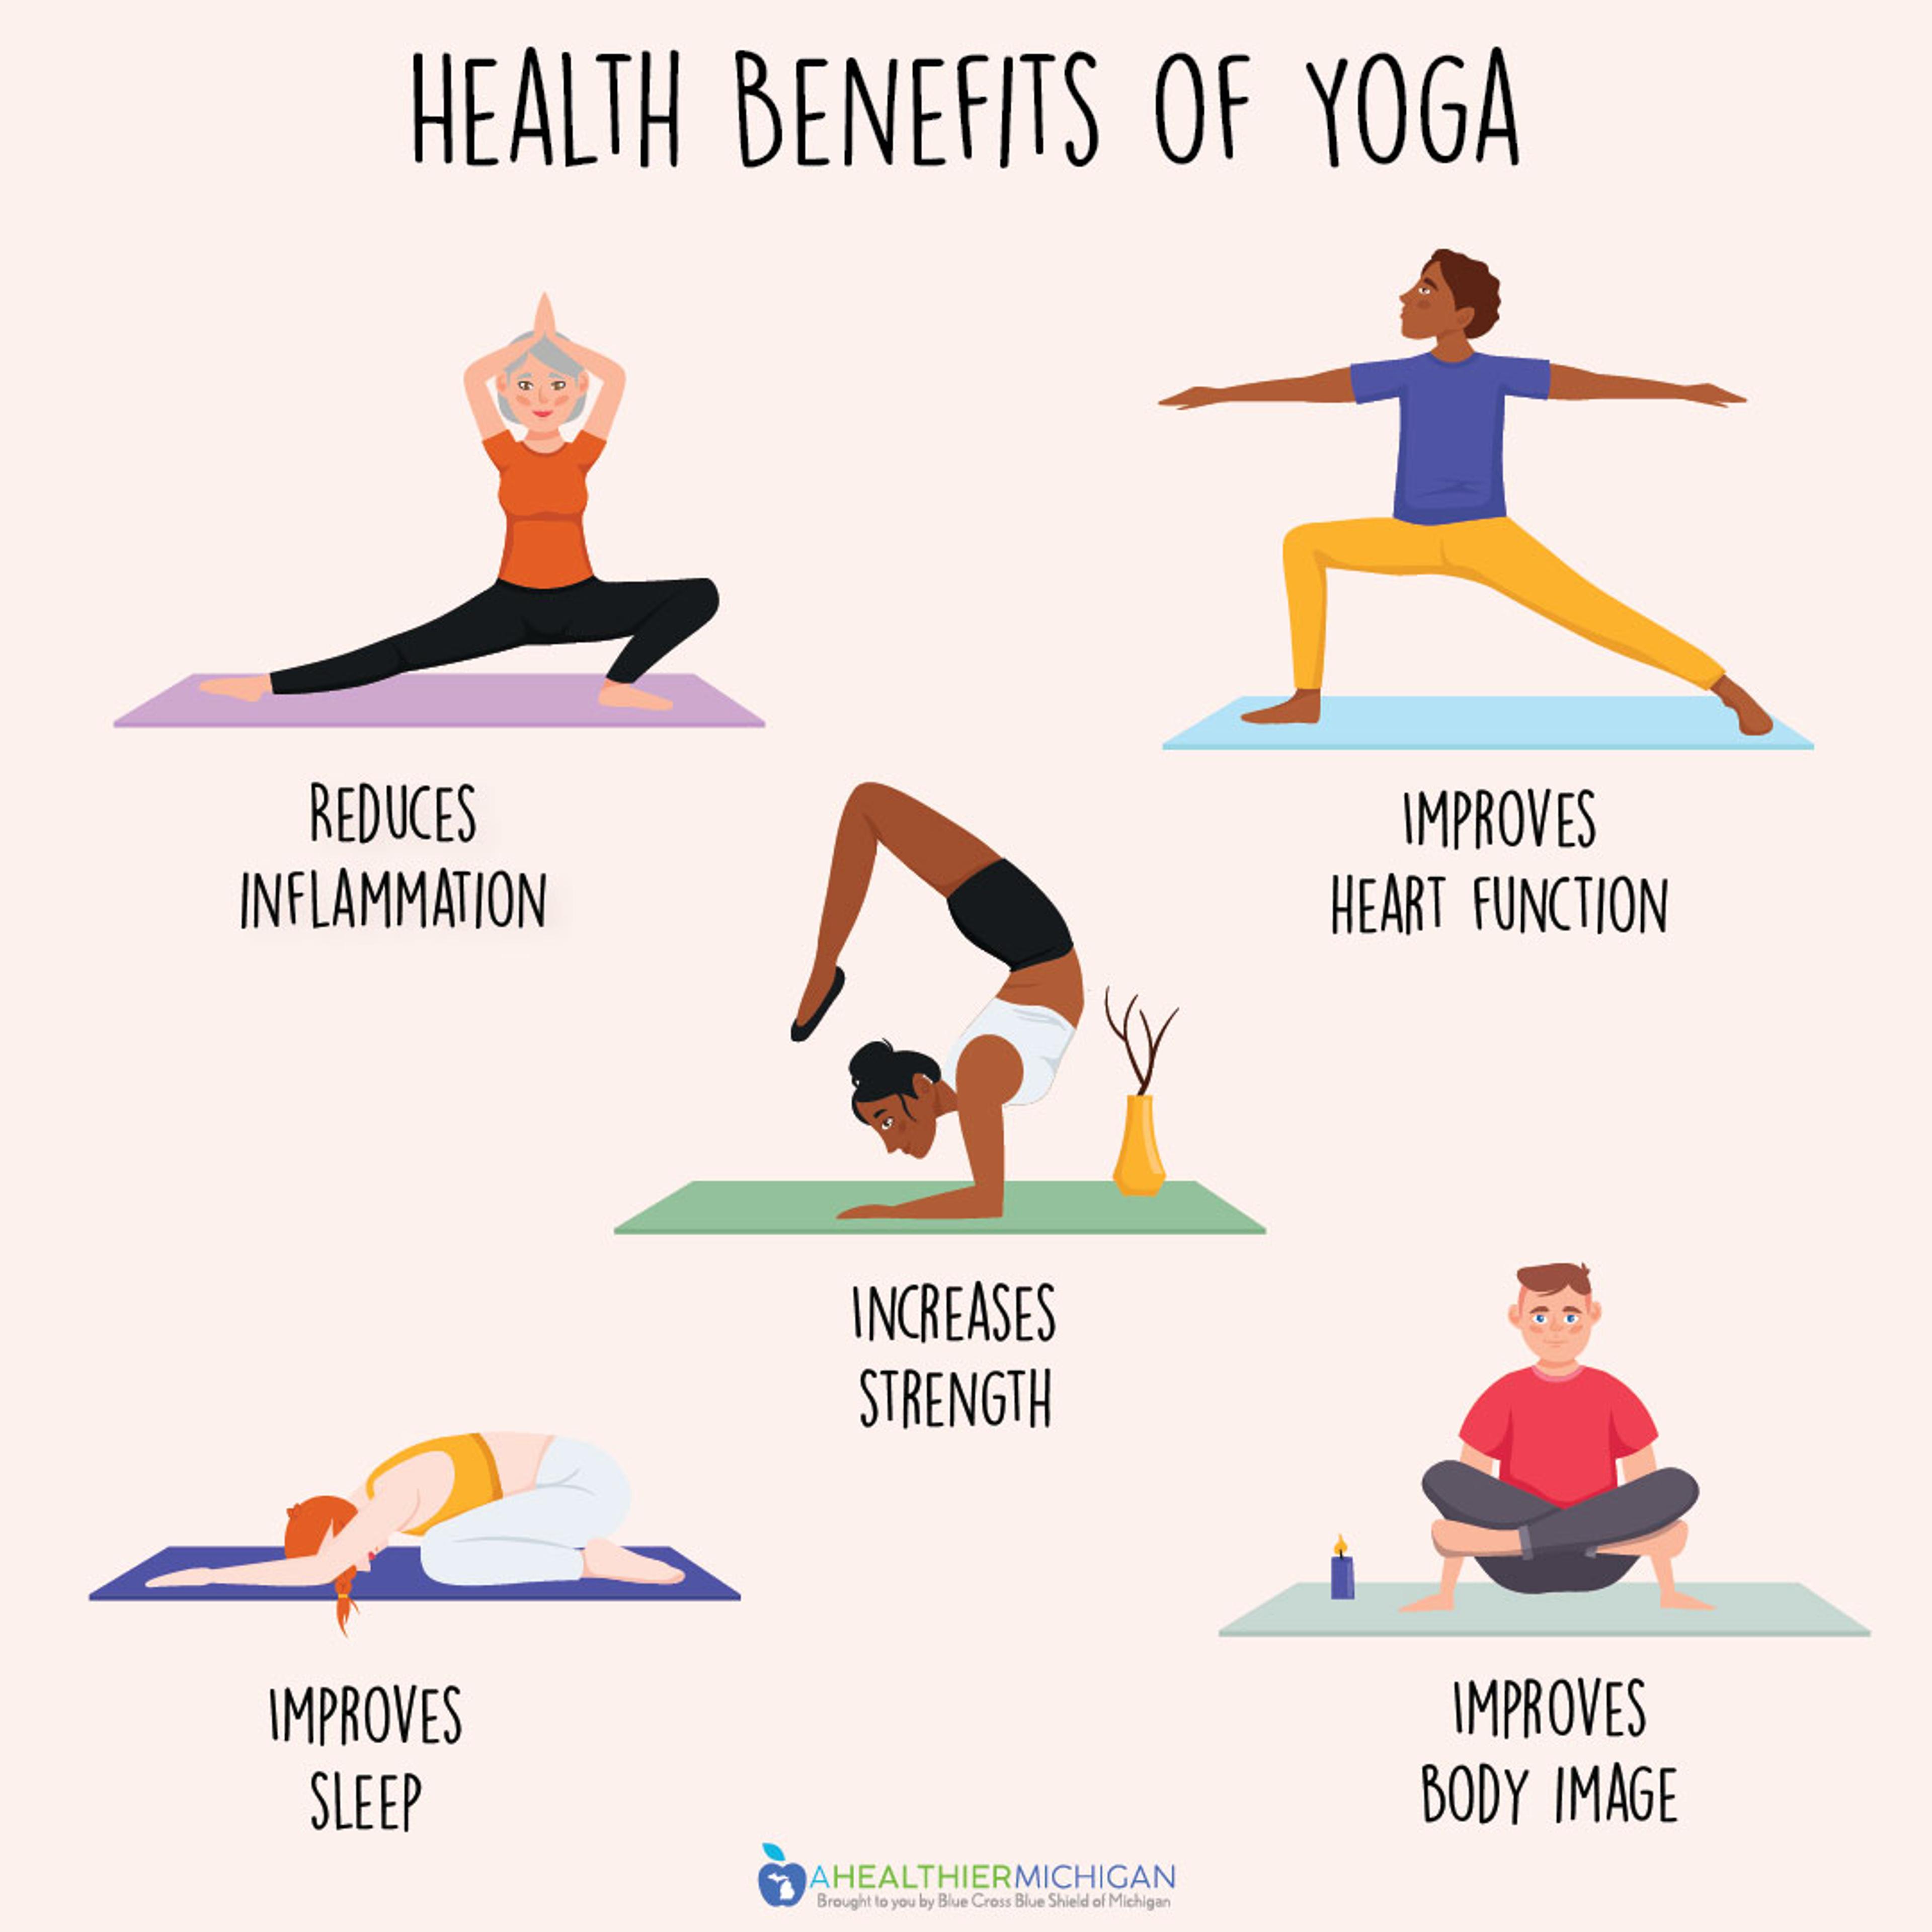 Health Benefits Of Yoga: Mind And Body